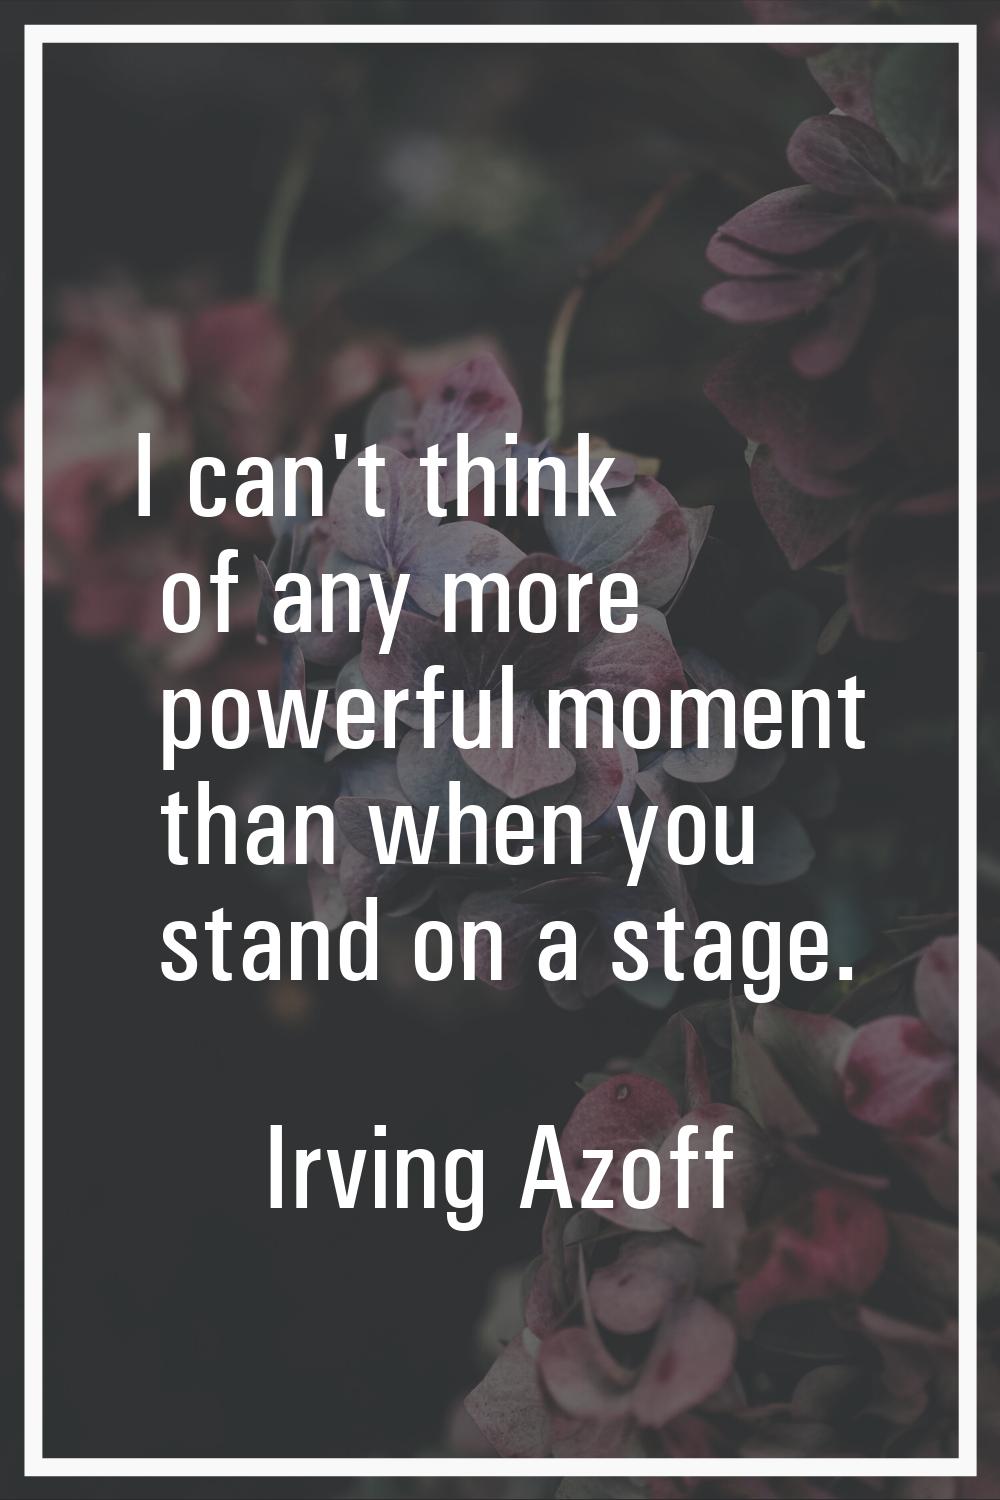 I can't think of any more powerful moment than when you stand on a stage.